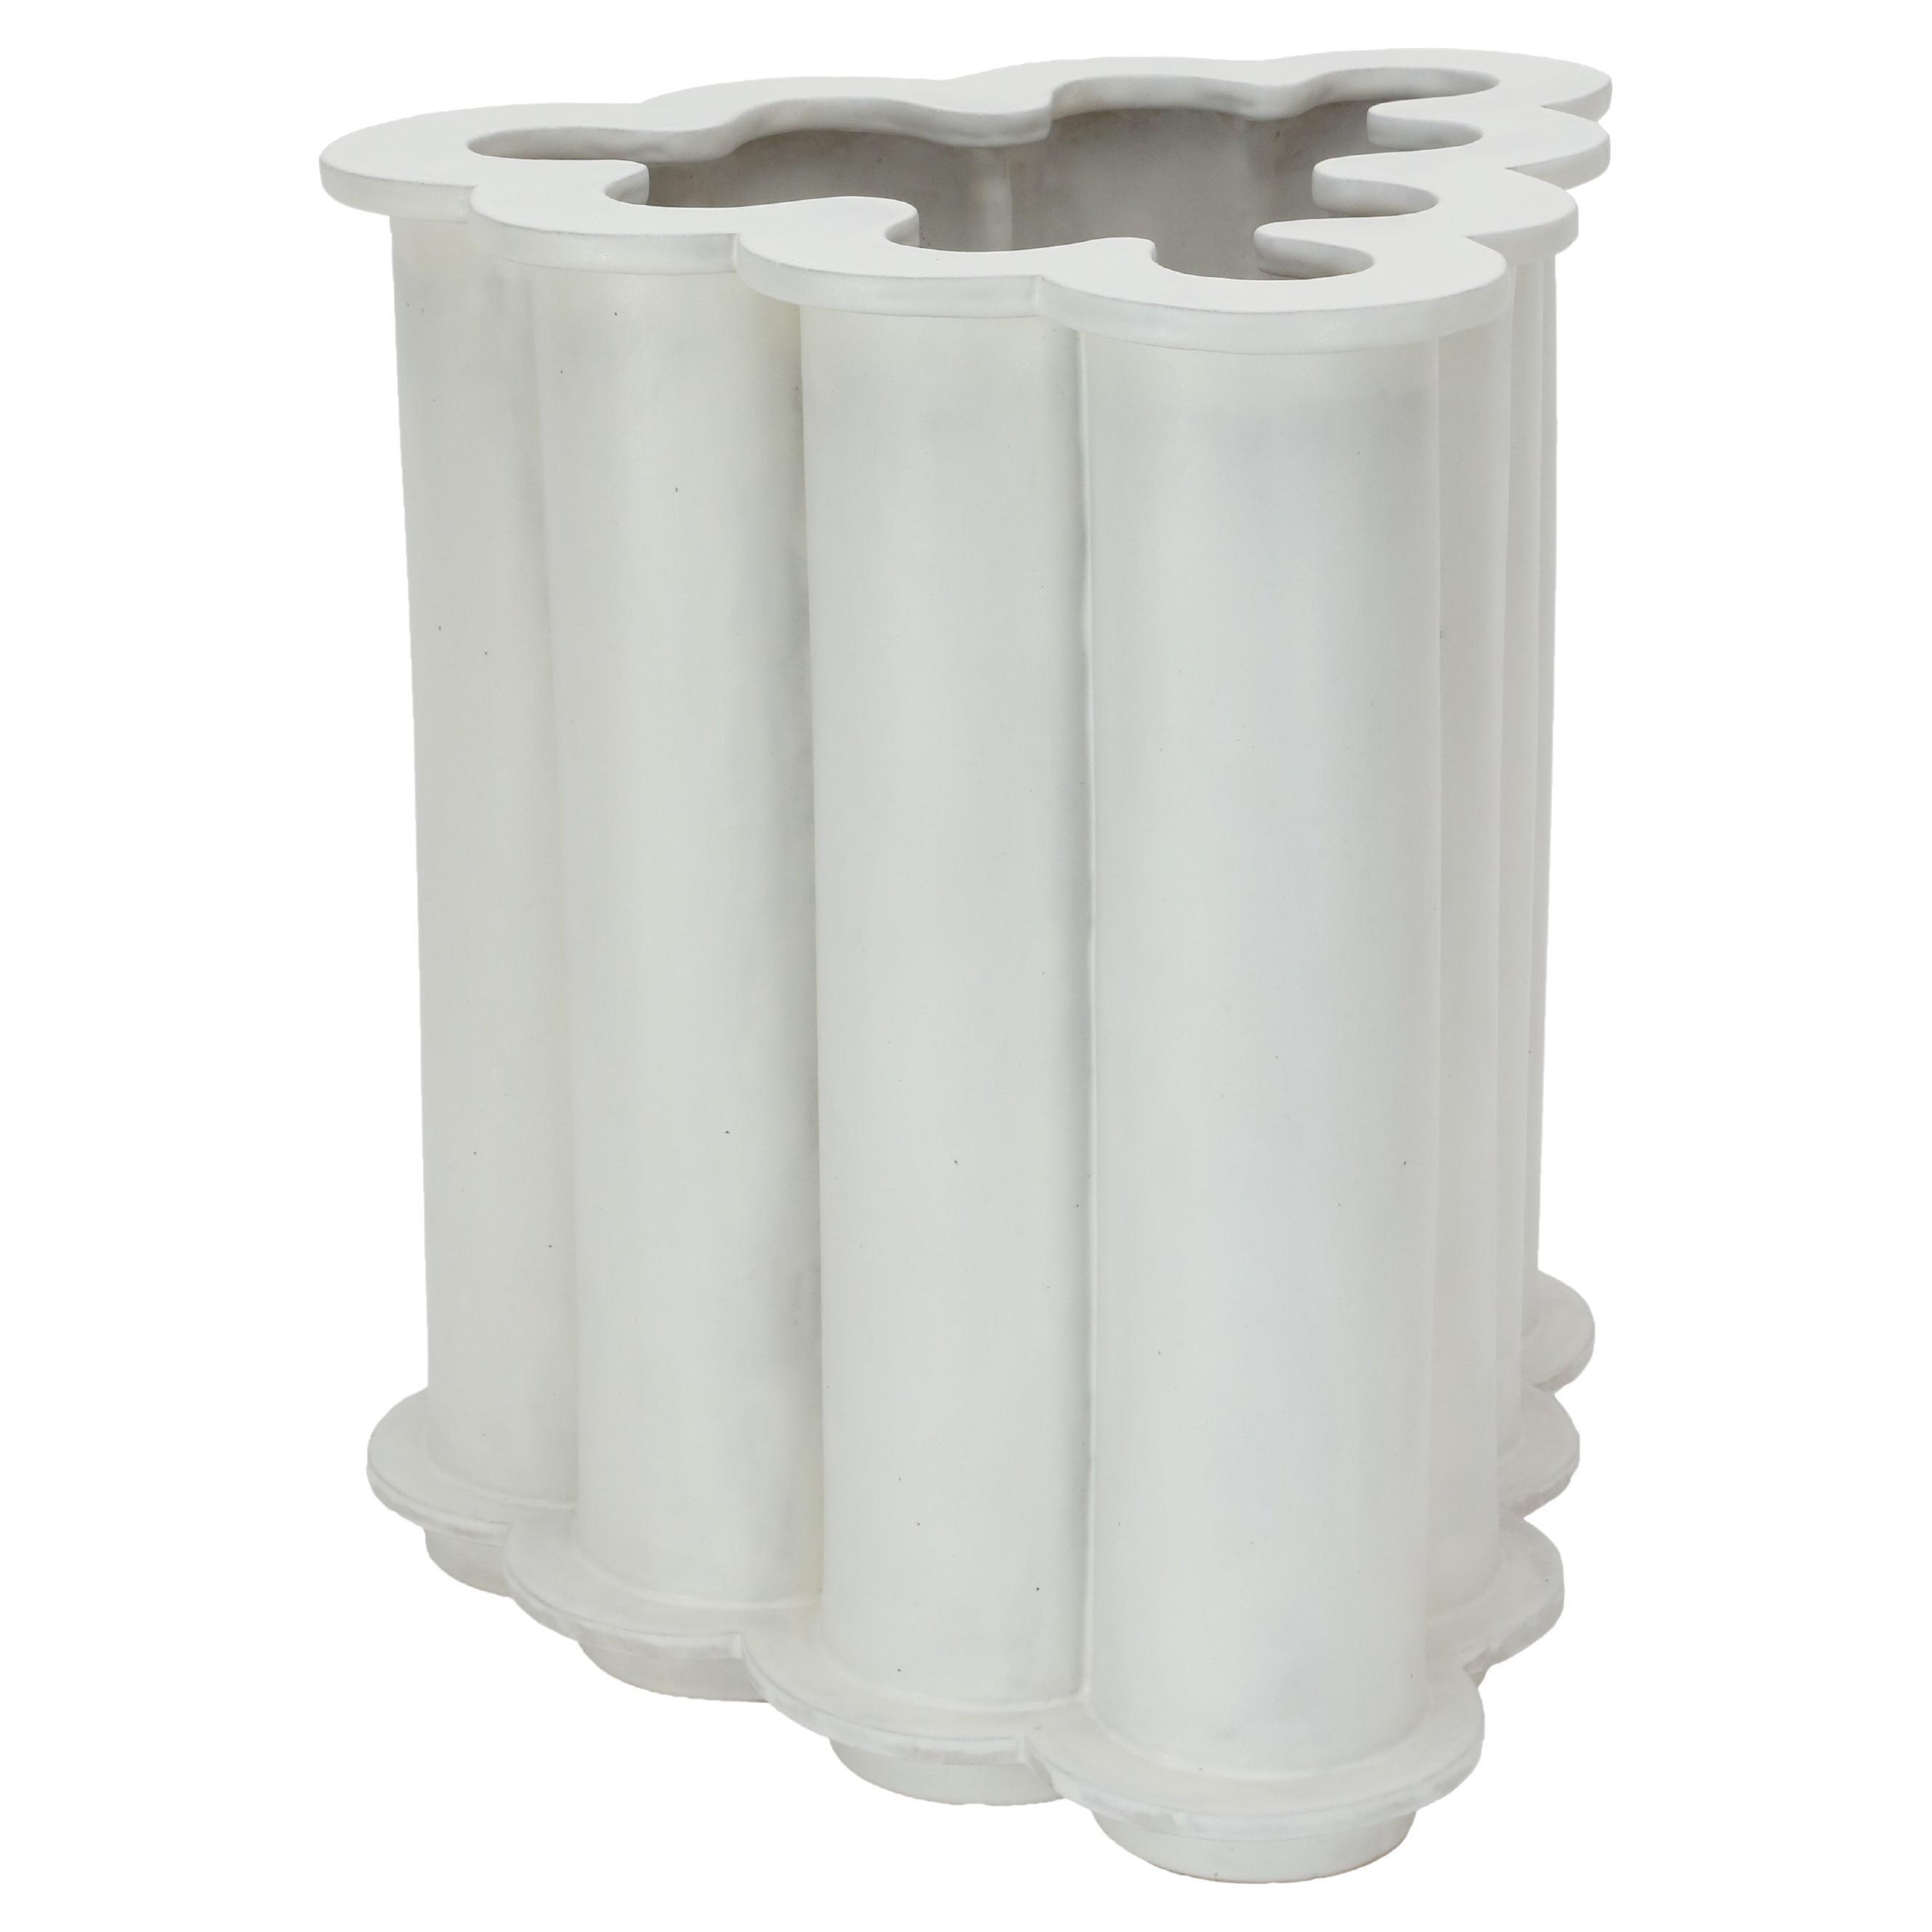 Tall Ruffle Ceramic Planter in Marshmallow by Bzippy For Sale